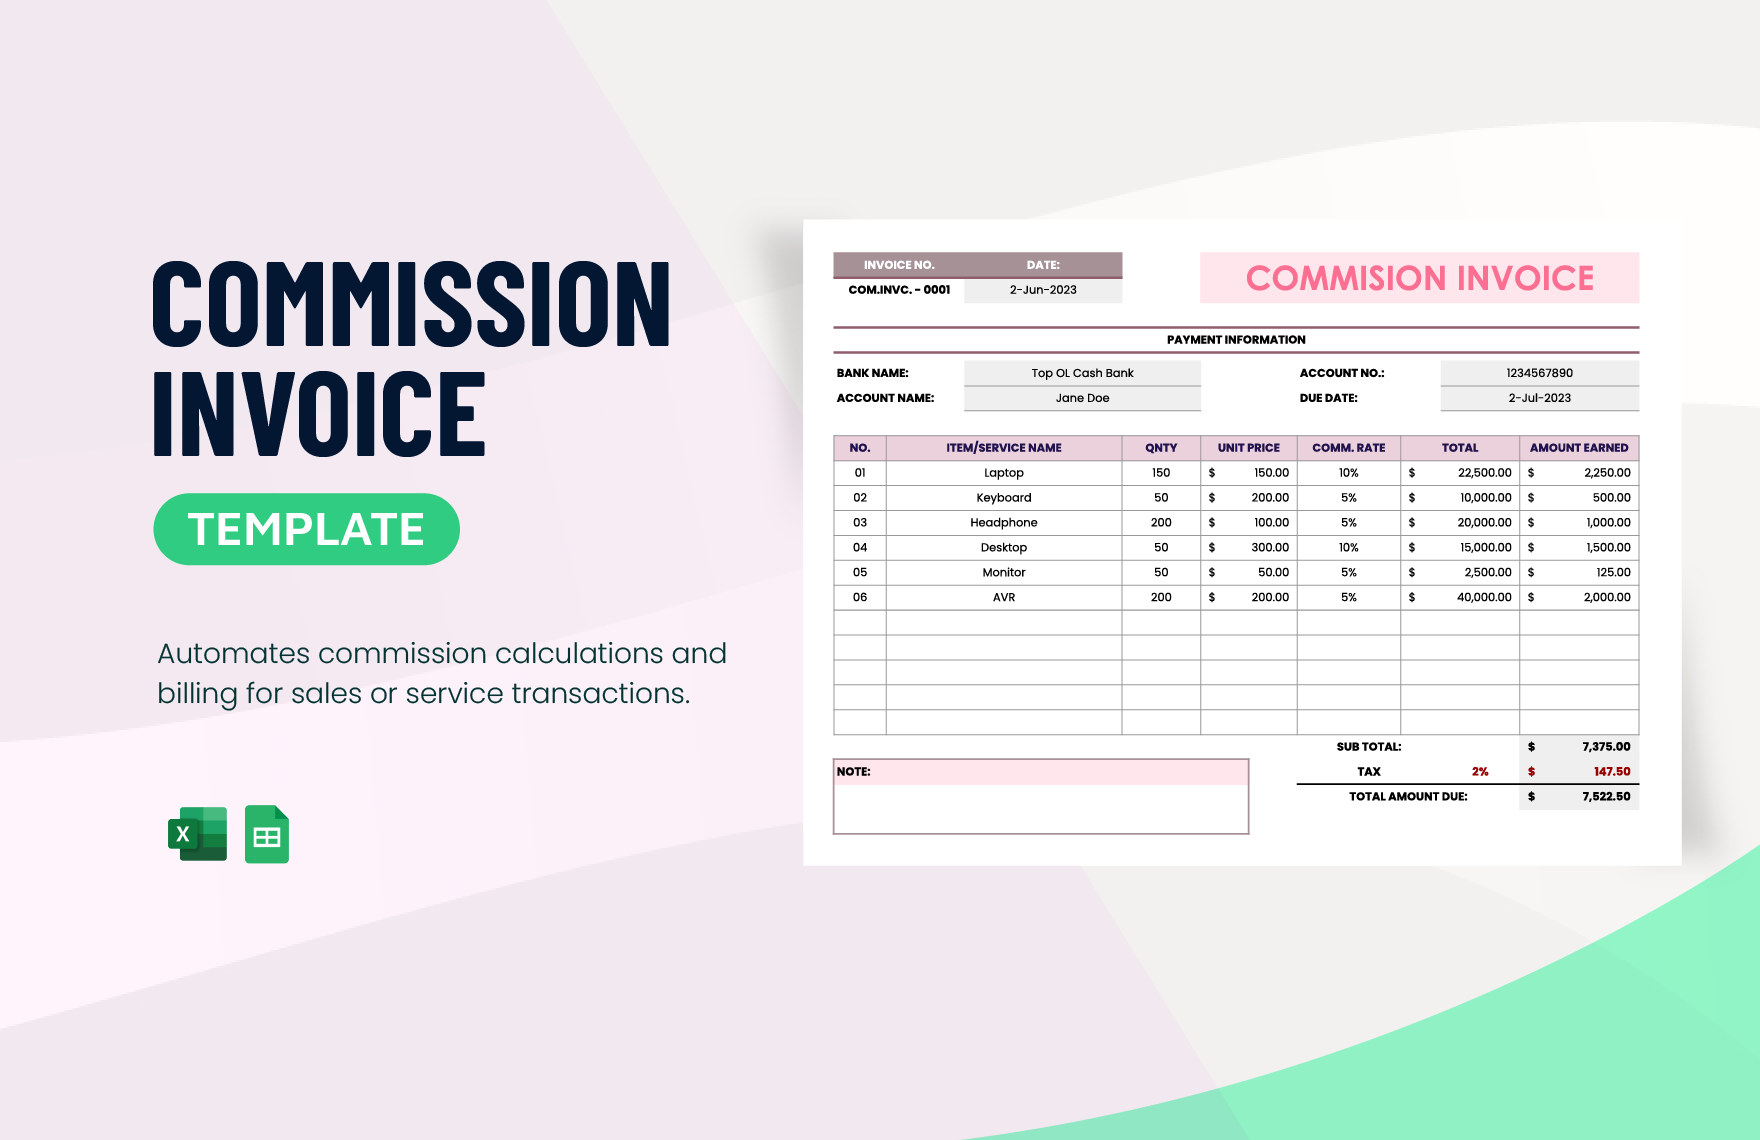 Commission Invoice Template in Excel, Google Sheets